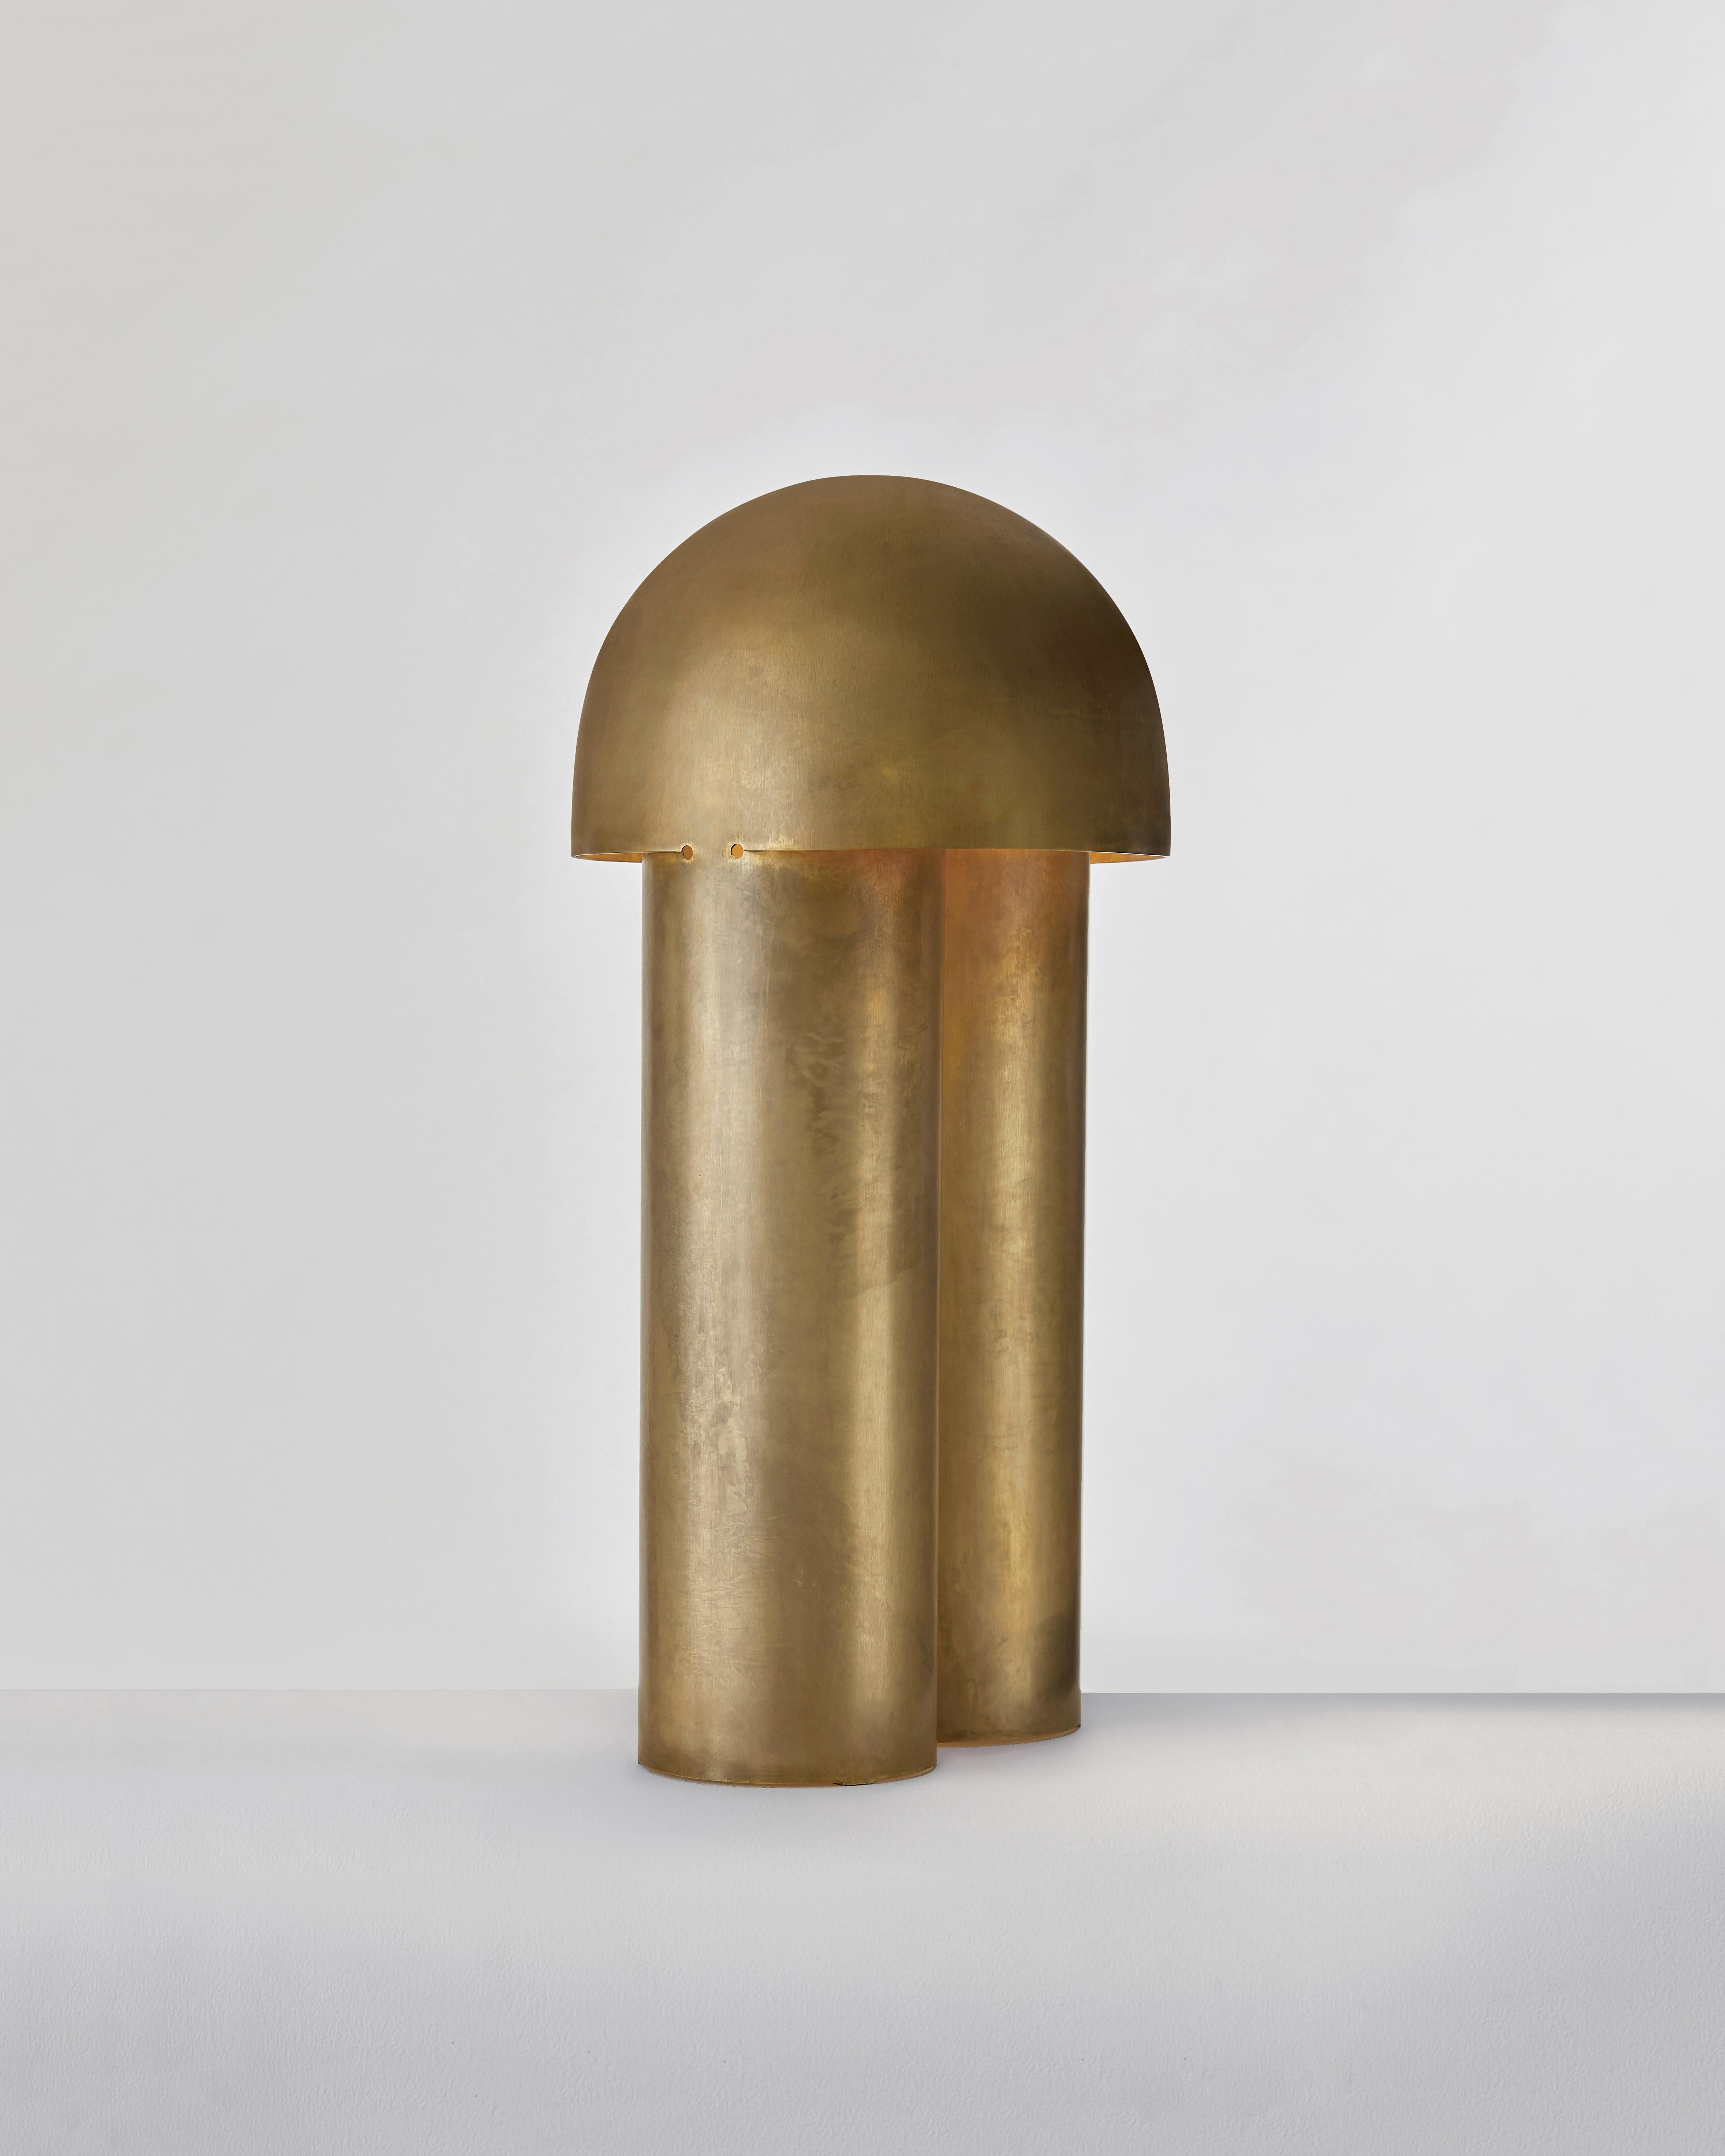 Monolith brass sculpted table lamp by Paul Matter
Measures: H 595 mm x D 280 mm
Weight: 3 kgs
Lamping: 1 type E14 base, 3 W-5 W LED, warm white
CE certified, voltage 220v-240v
Dimmable upon request
Materials: Brass

Custom finishes:
1. Aged brass
2.